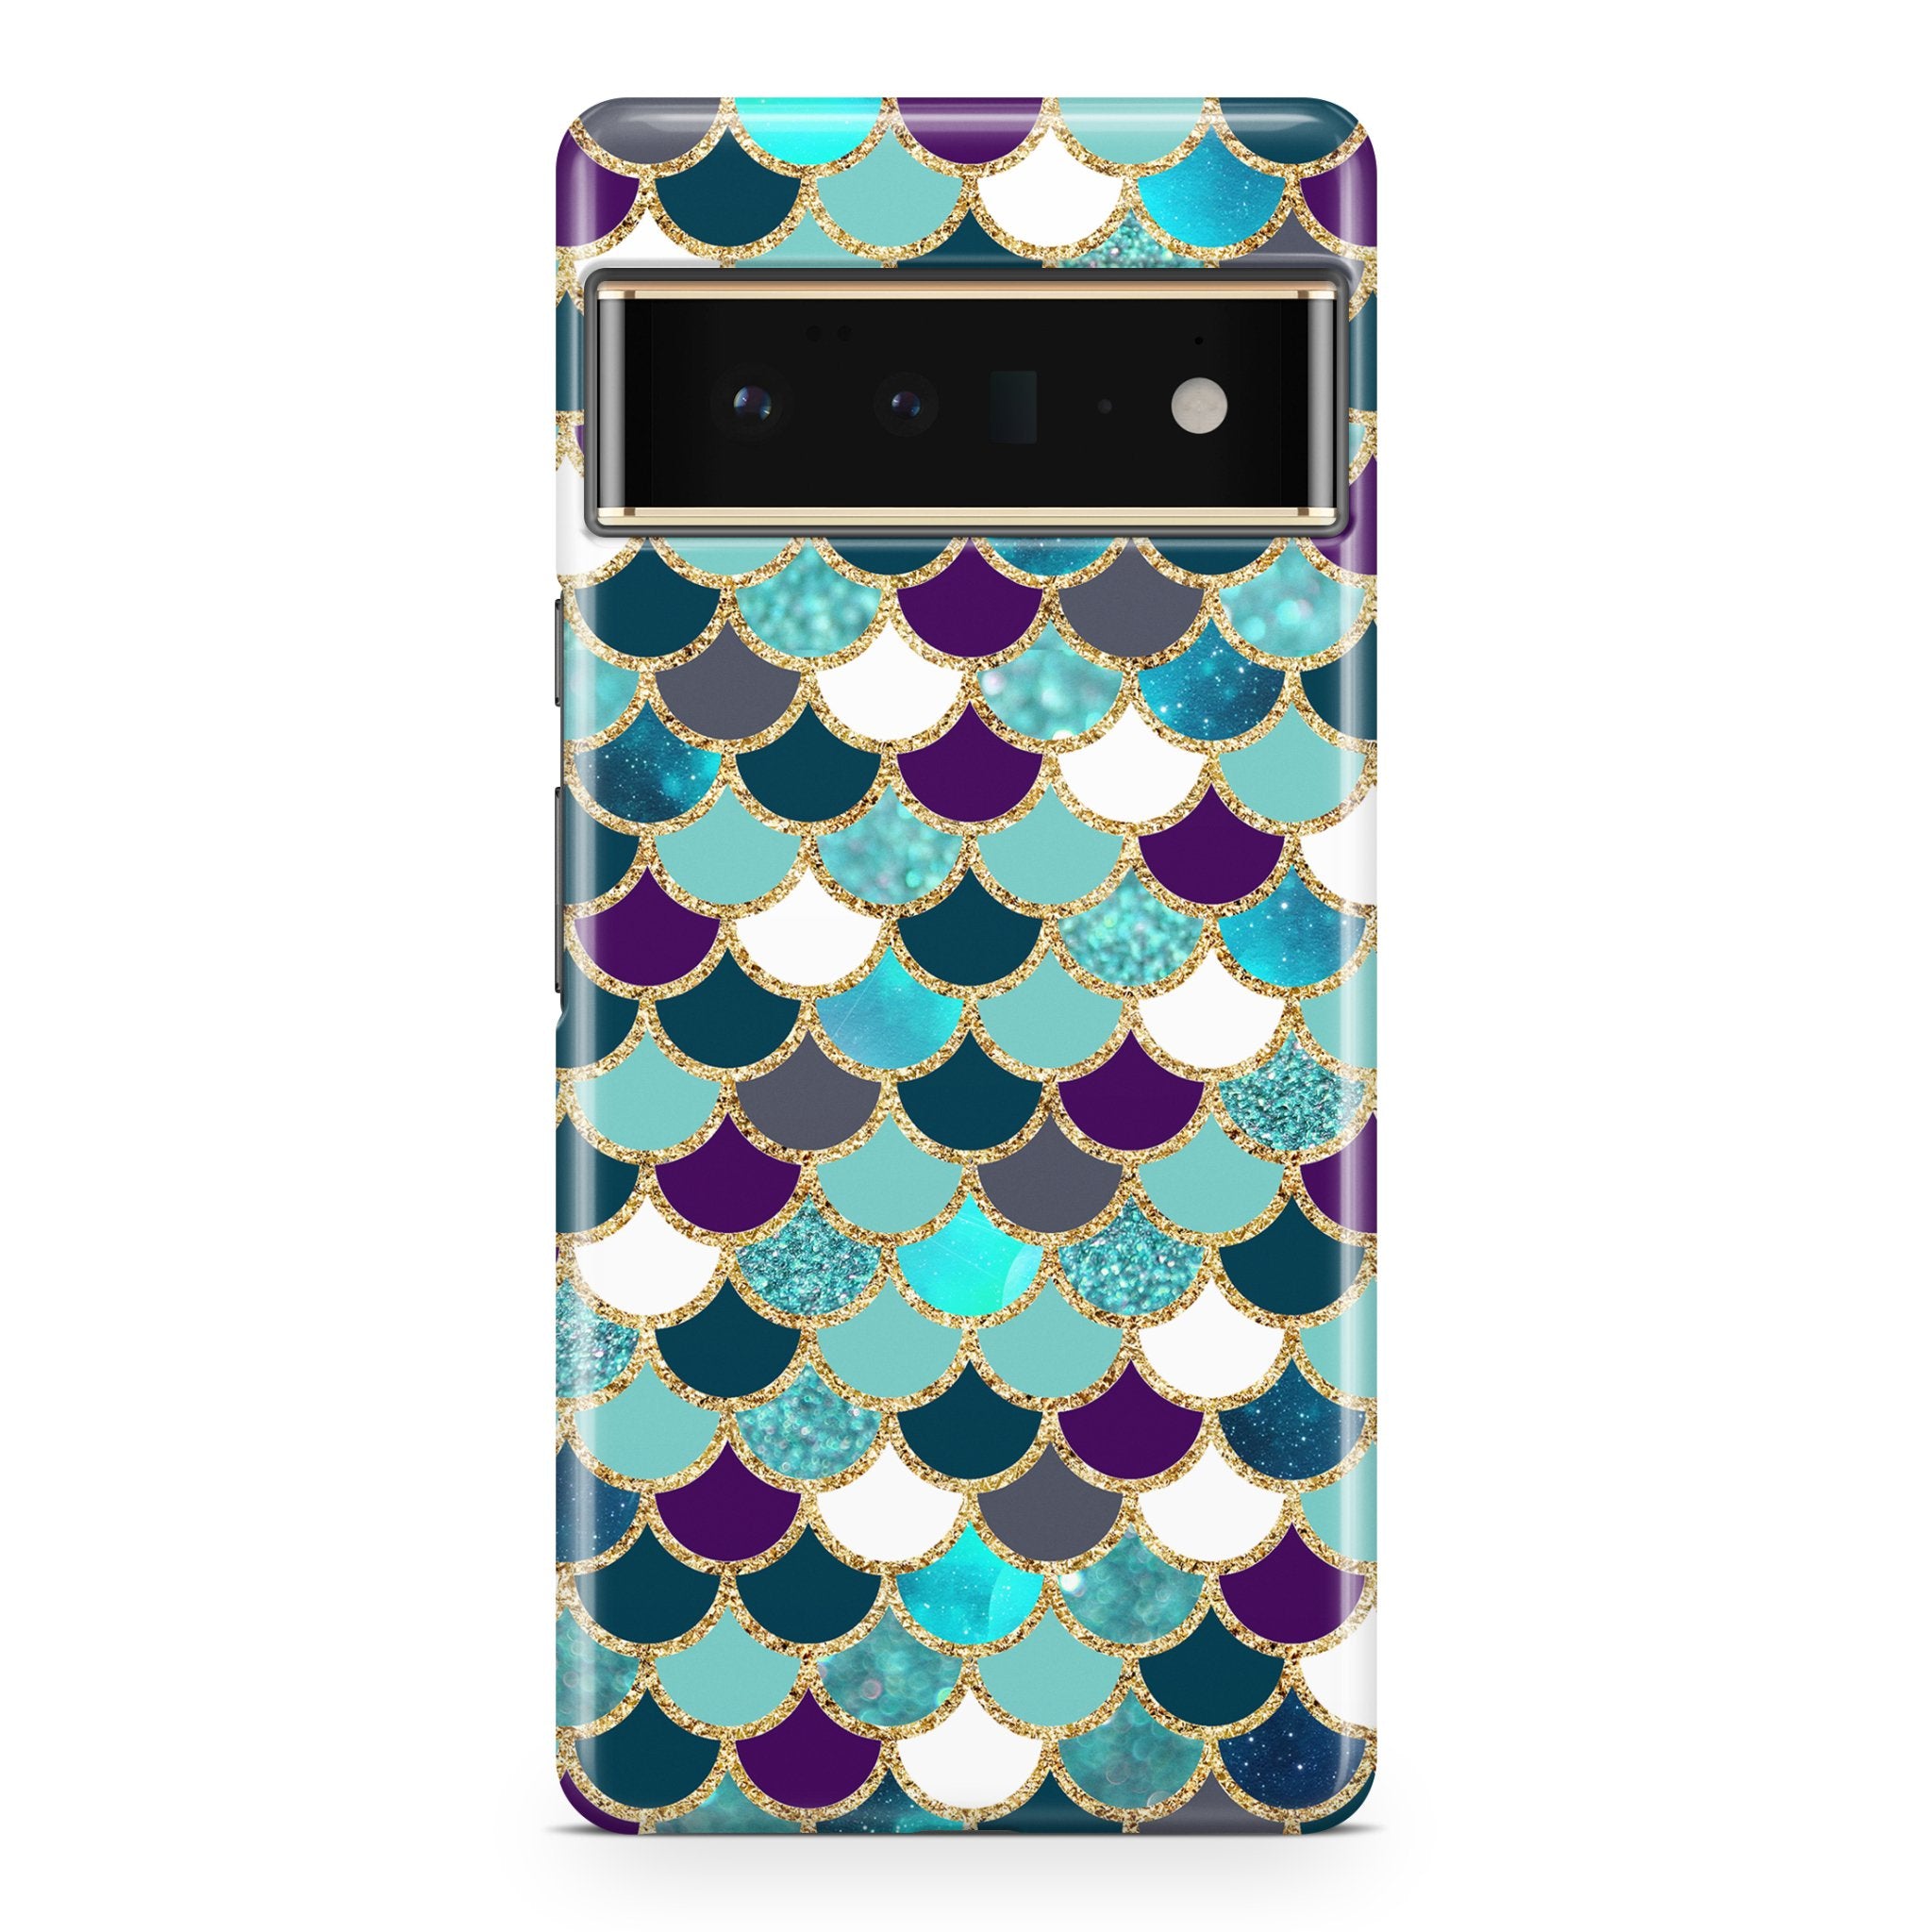 Green & Purple (Gold) Mermaid Scale - Google phone case designs by CaseSwagger